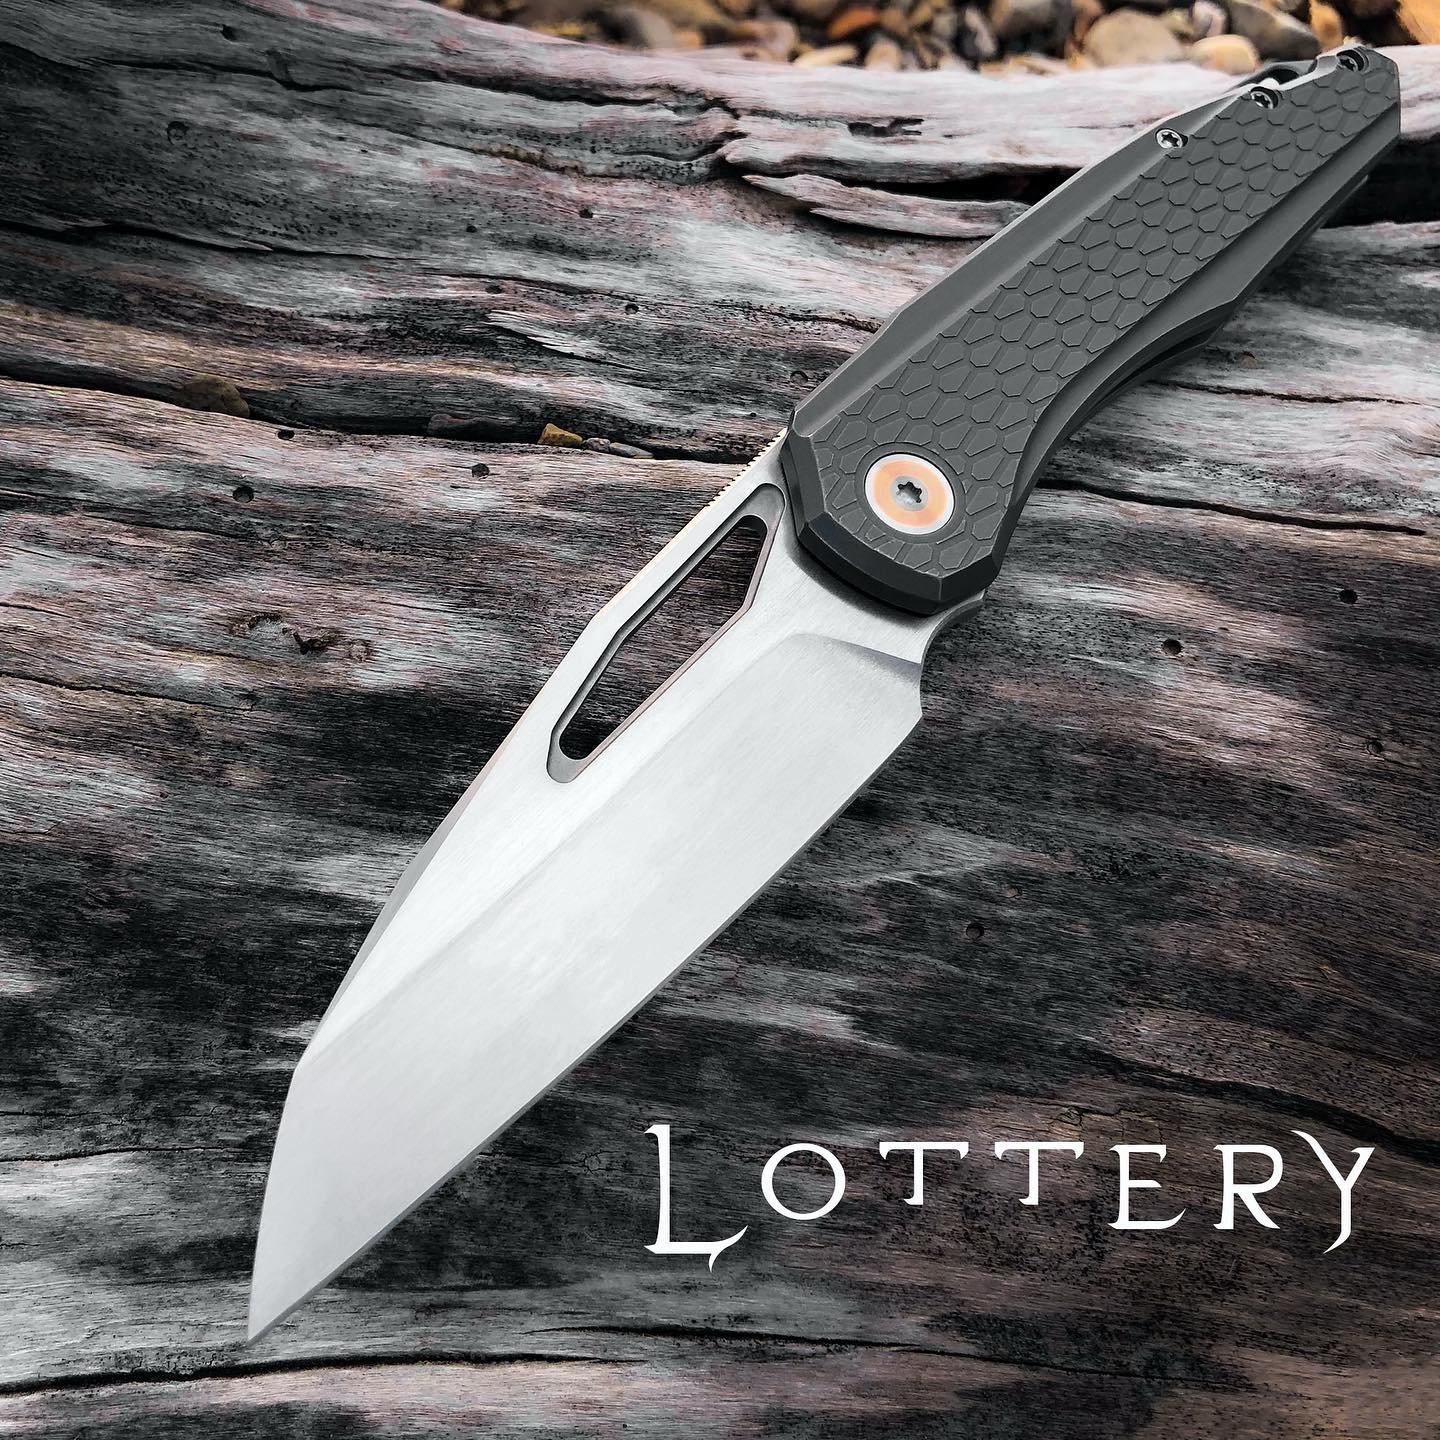 ☞ LOTTERY *CLOSED - winner announced in stories*
for this custom Sigil NF #001

SPECS
blade length: 3 1/2&rdquo;
OAL: 7 7/8&rdquo;
blade: hand polished S90V Rc 61/62
frames: stonewashed coffin scaled 6AL4V titanium 
clip: coffin scaled 6AL4V titanium